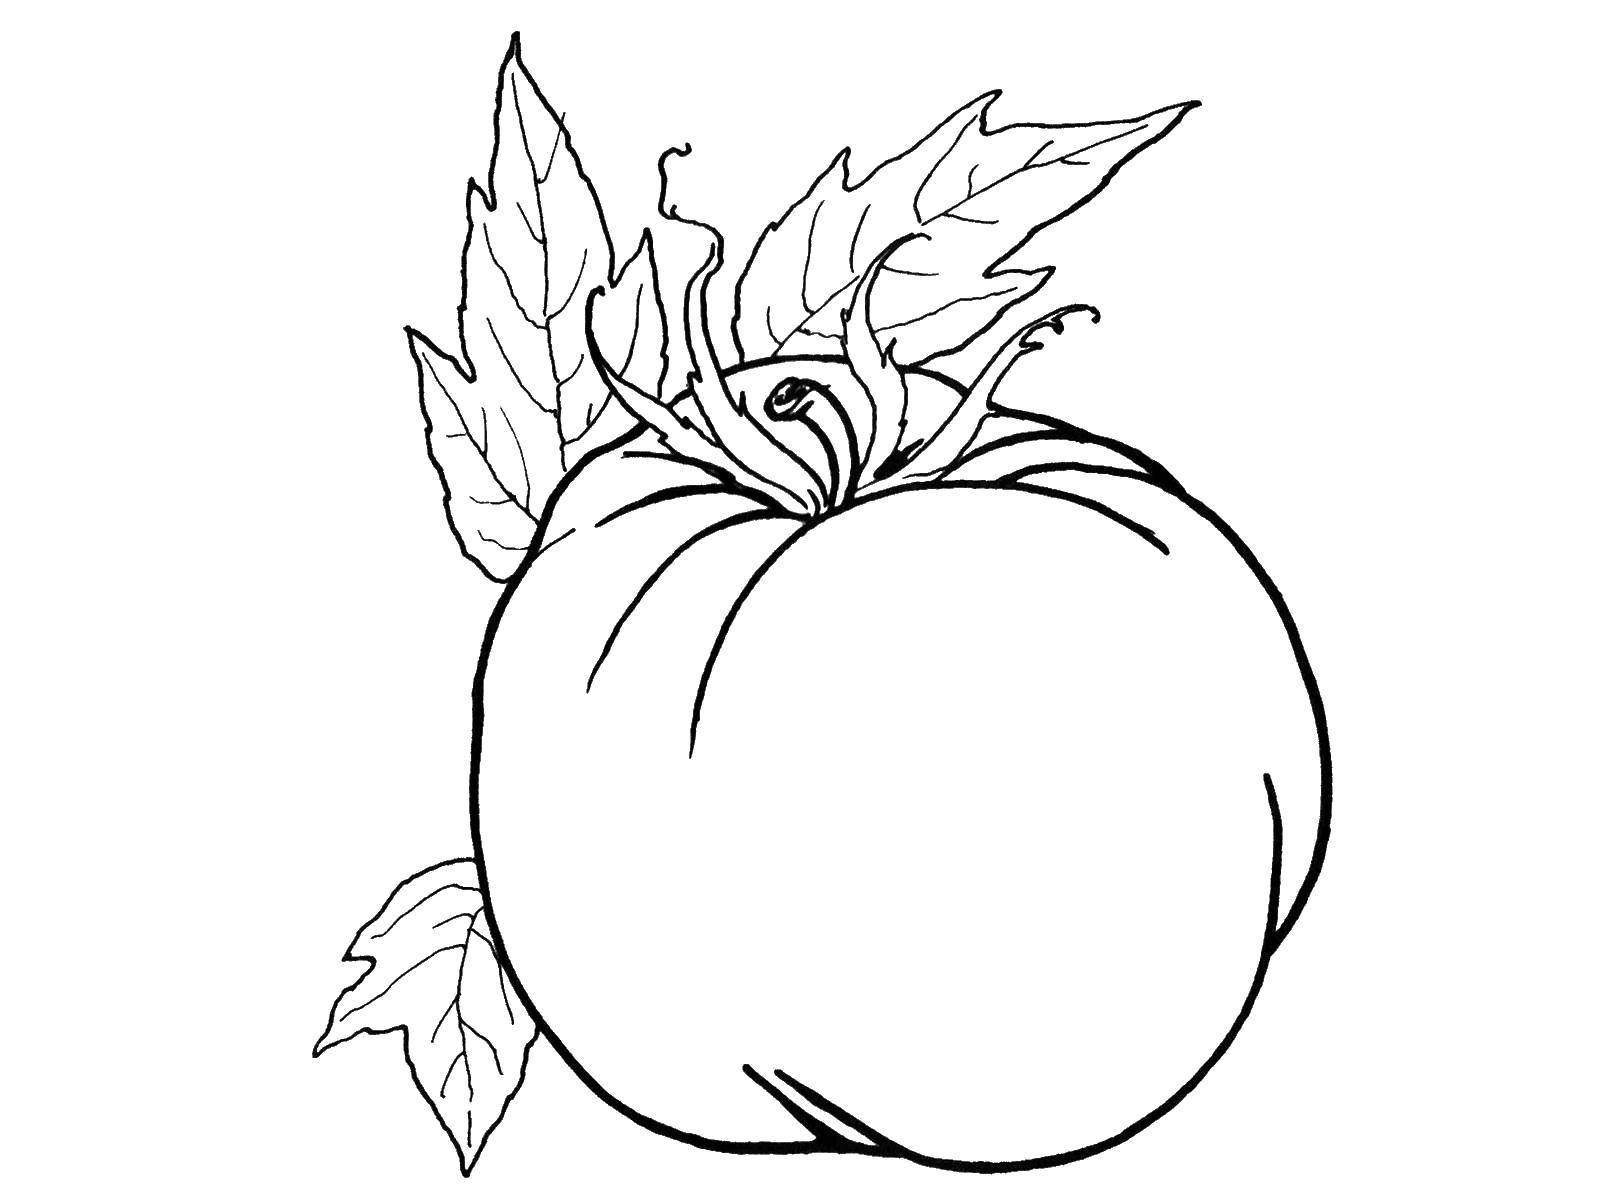 Coloring Tomato. Category tomato. Tags:  vegetables, tomatoes.